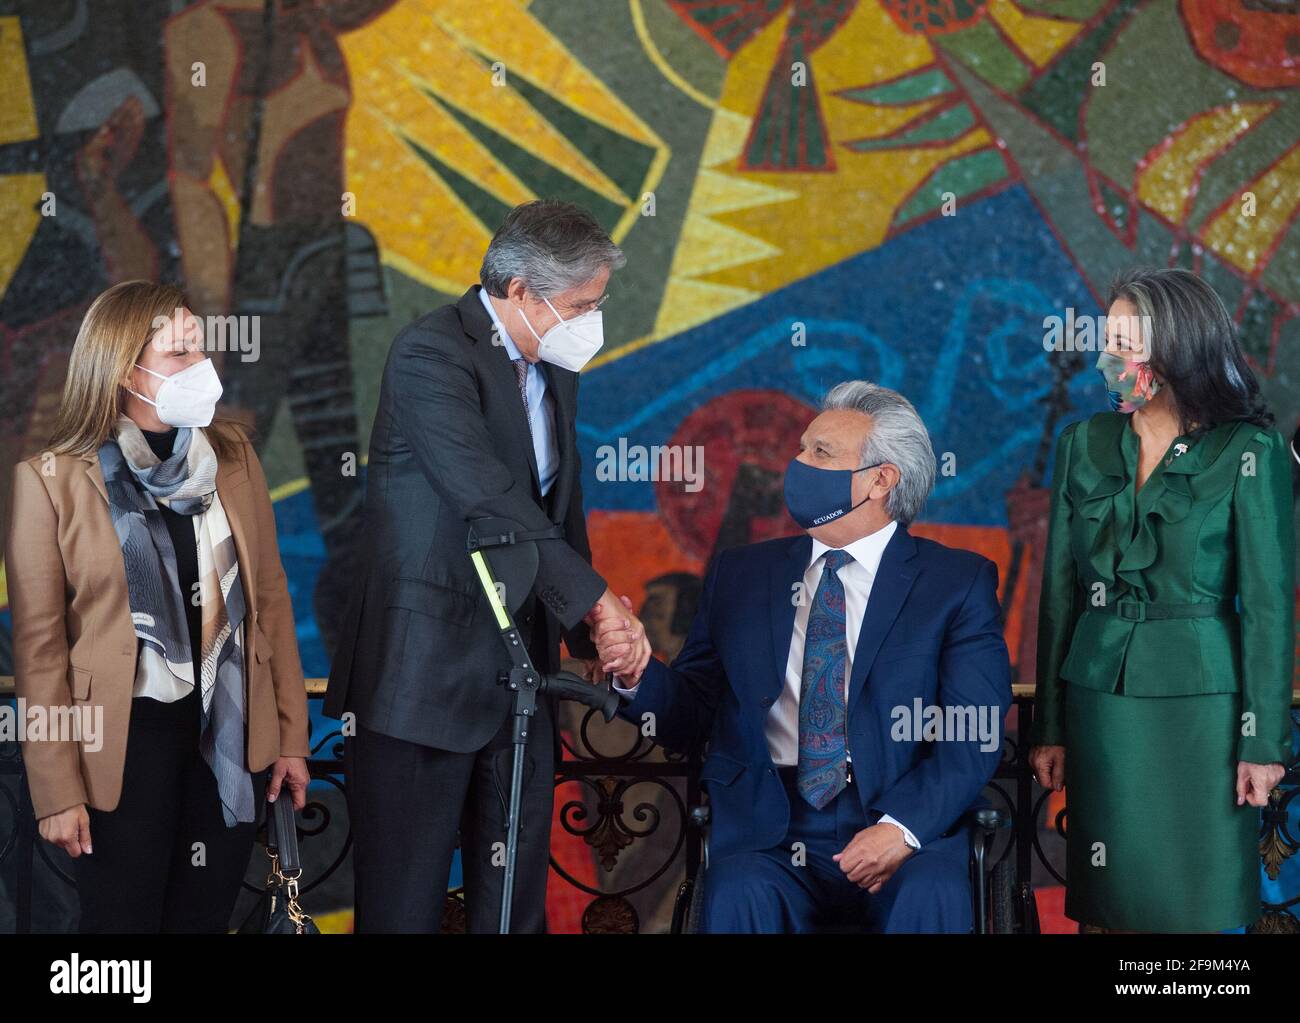 Quito, Ecuador. 19th Apr, 2021. Guillermo Lasso (m., l), president-elect of Ecuador, shakes hands with Lenin Moreno (m., r), president of Ecuador, after a meeting attended by future first lady Lourdes Alcivar (3rd from left). Lasso, a conservative banker, will take office on May 24. Credit: Juan Diego Montenegro/dpa/Alamy Live News Stock Photo